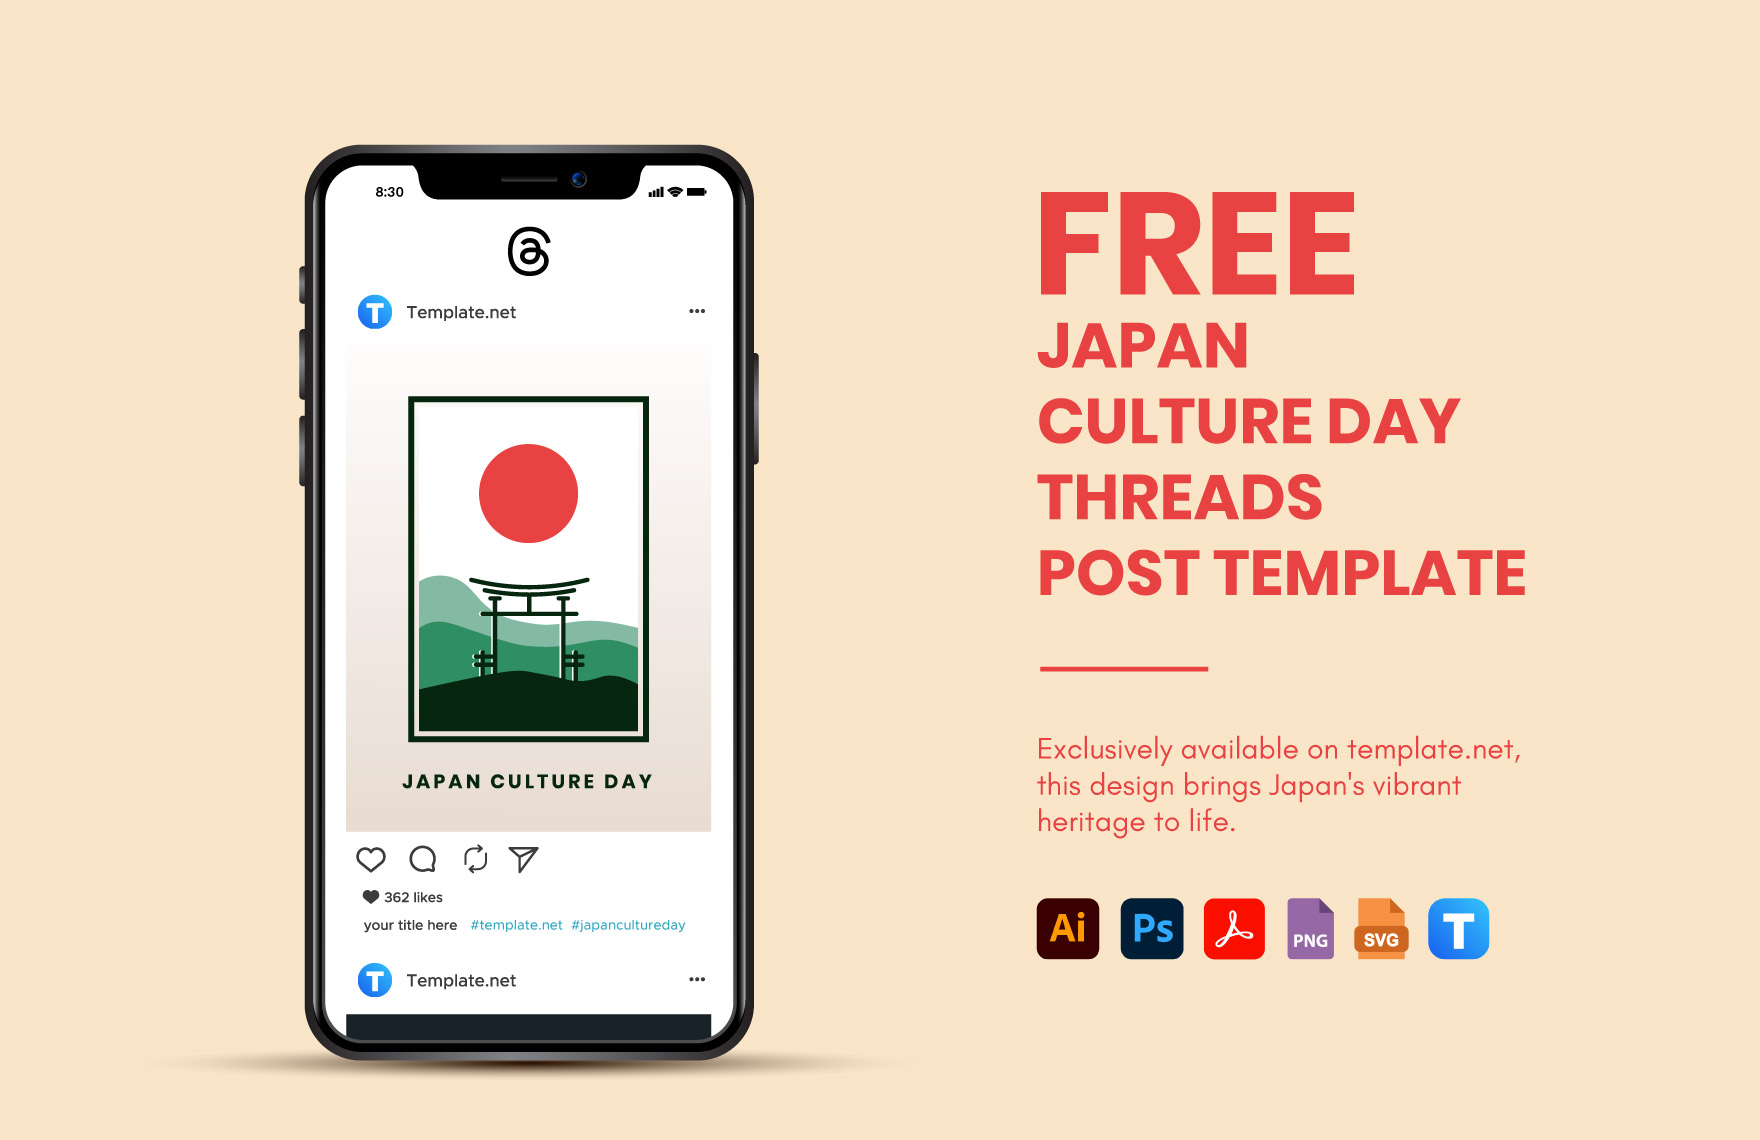 Free Japan Culture Day Threads Post Template in PDF, Illustrator, PSD, SVG, PNG